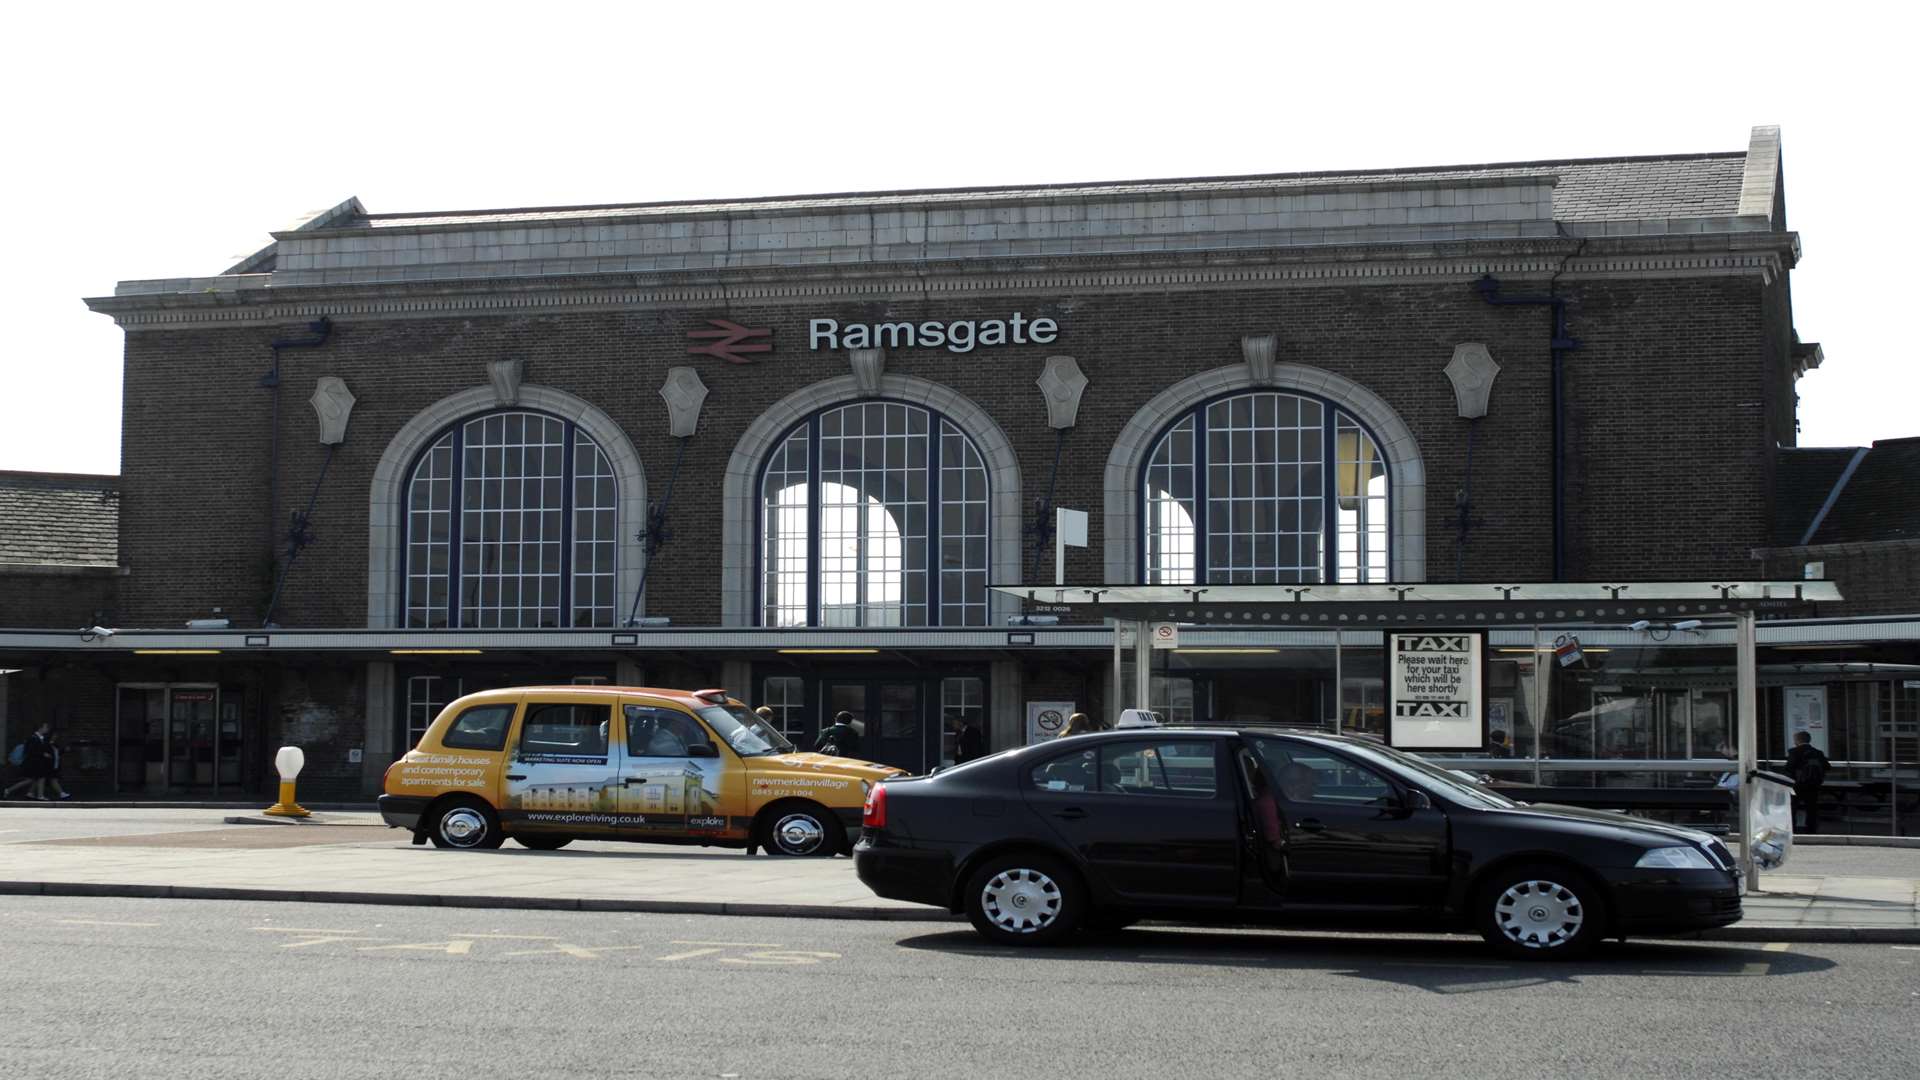 Police and ambulances were called to Ramsgate Station